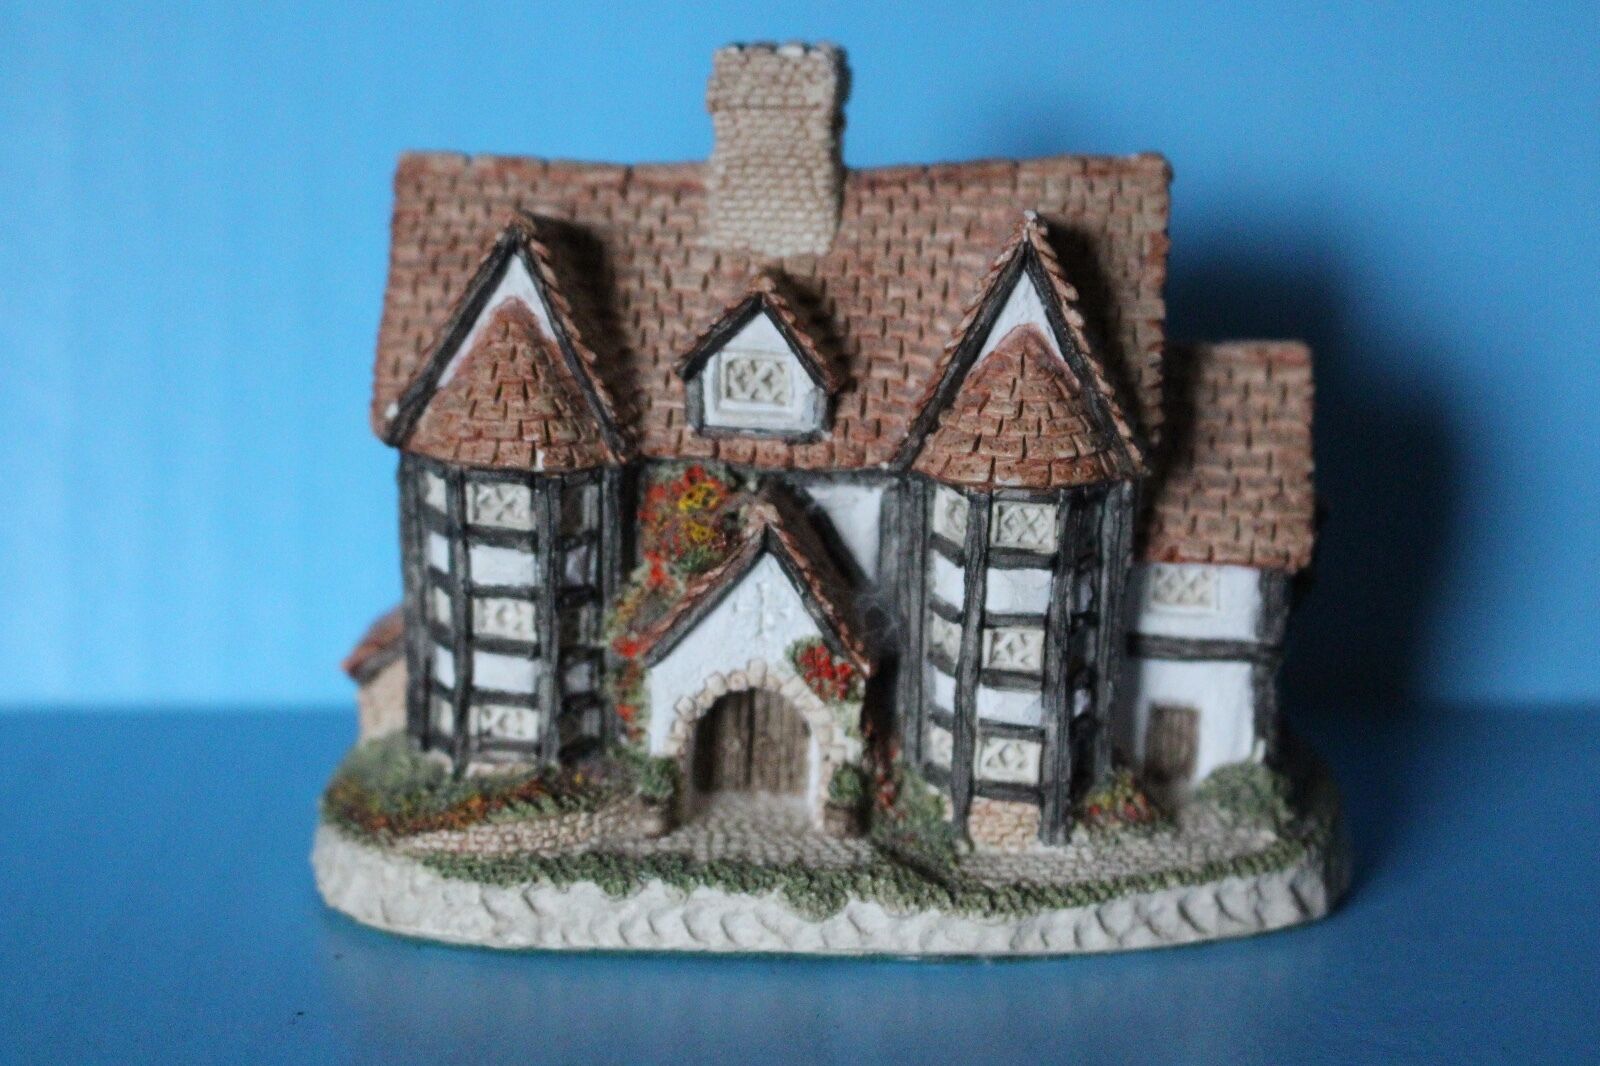 SHIREHALL BY DAVID WINTER HAND MADE AND HAND PAINTED GREAT HAMPSHIRE BRITAIN1985